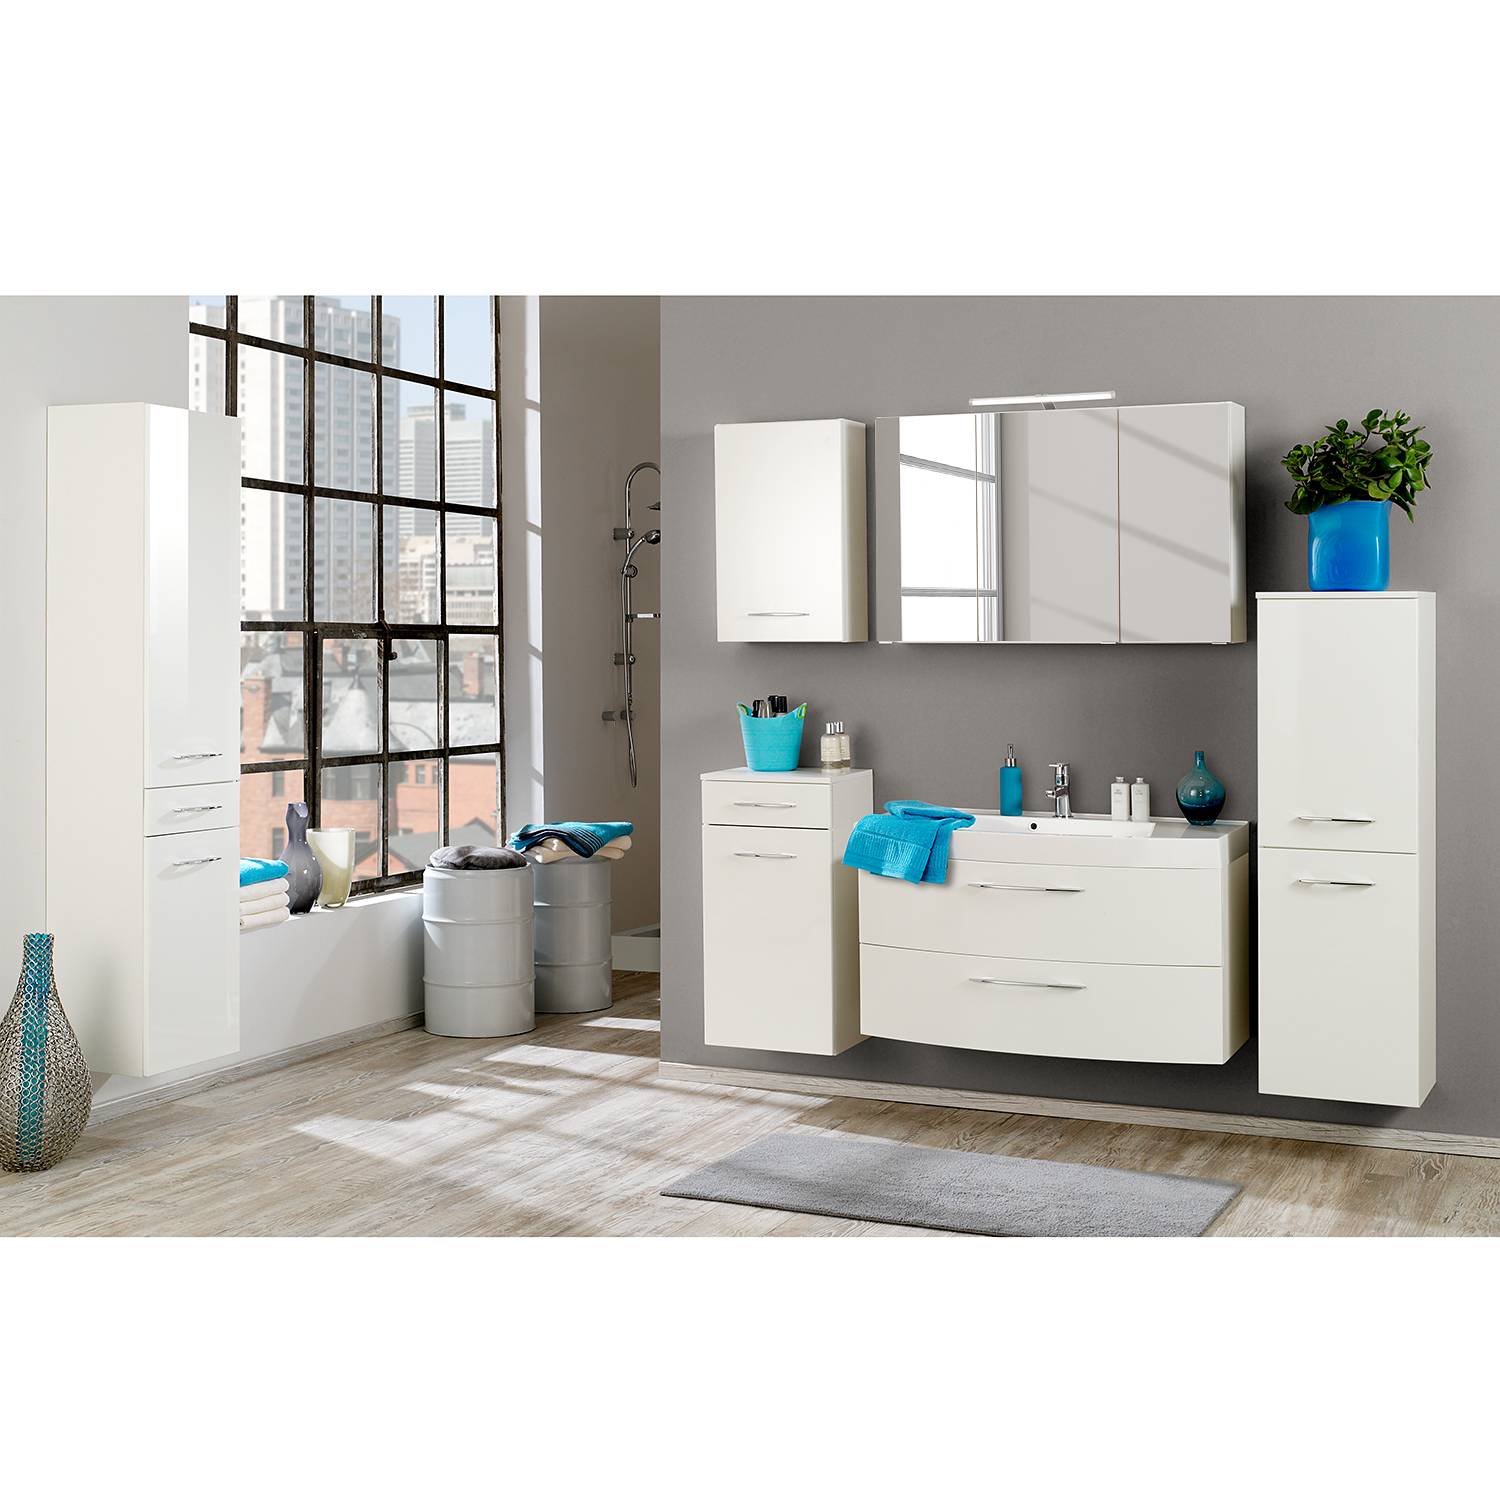 Image of Armoire colonne Florida 000000001000047719